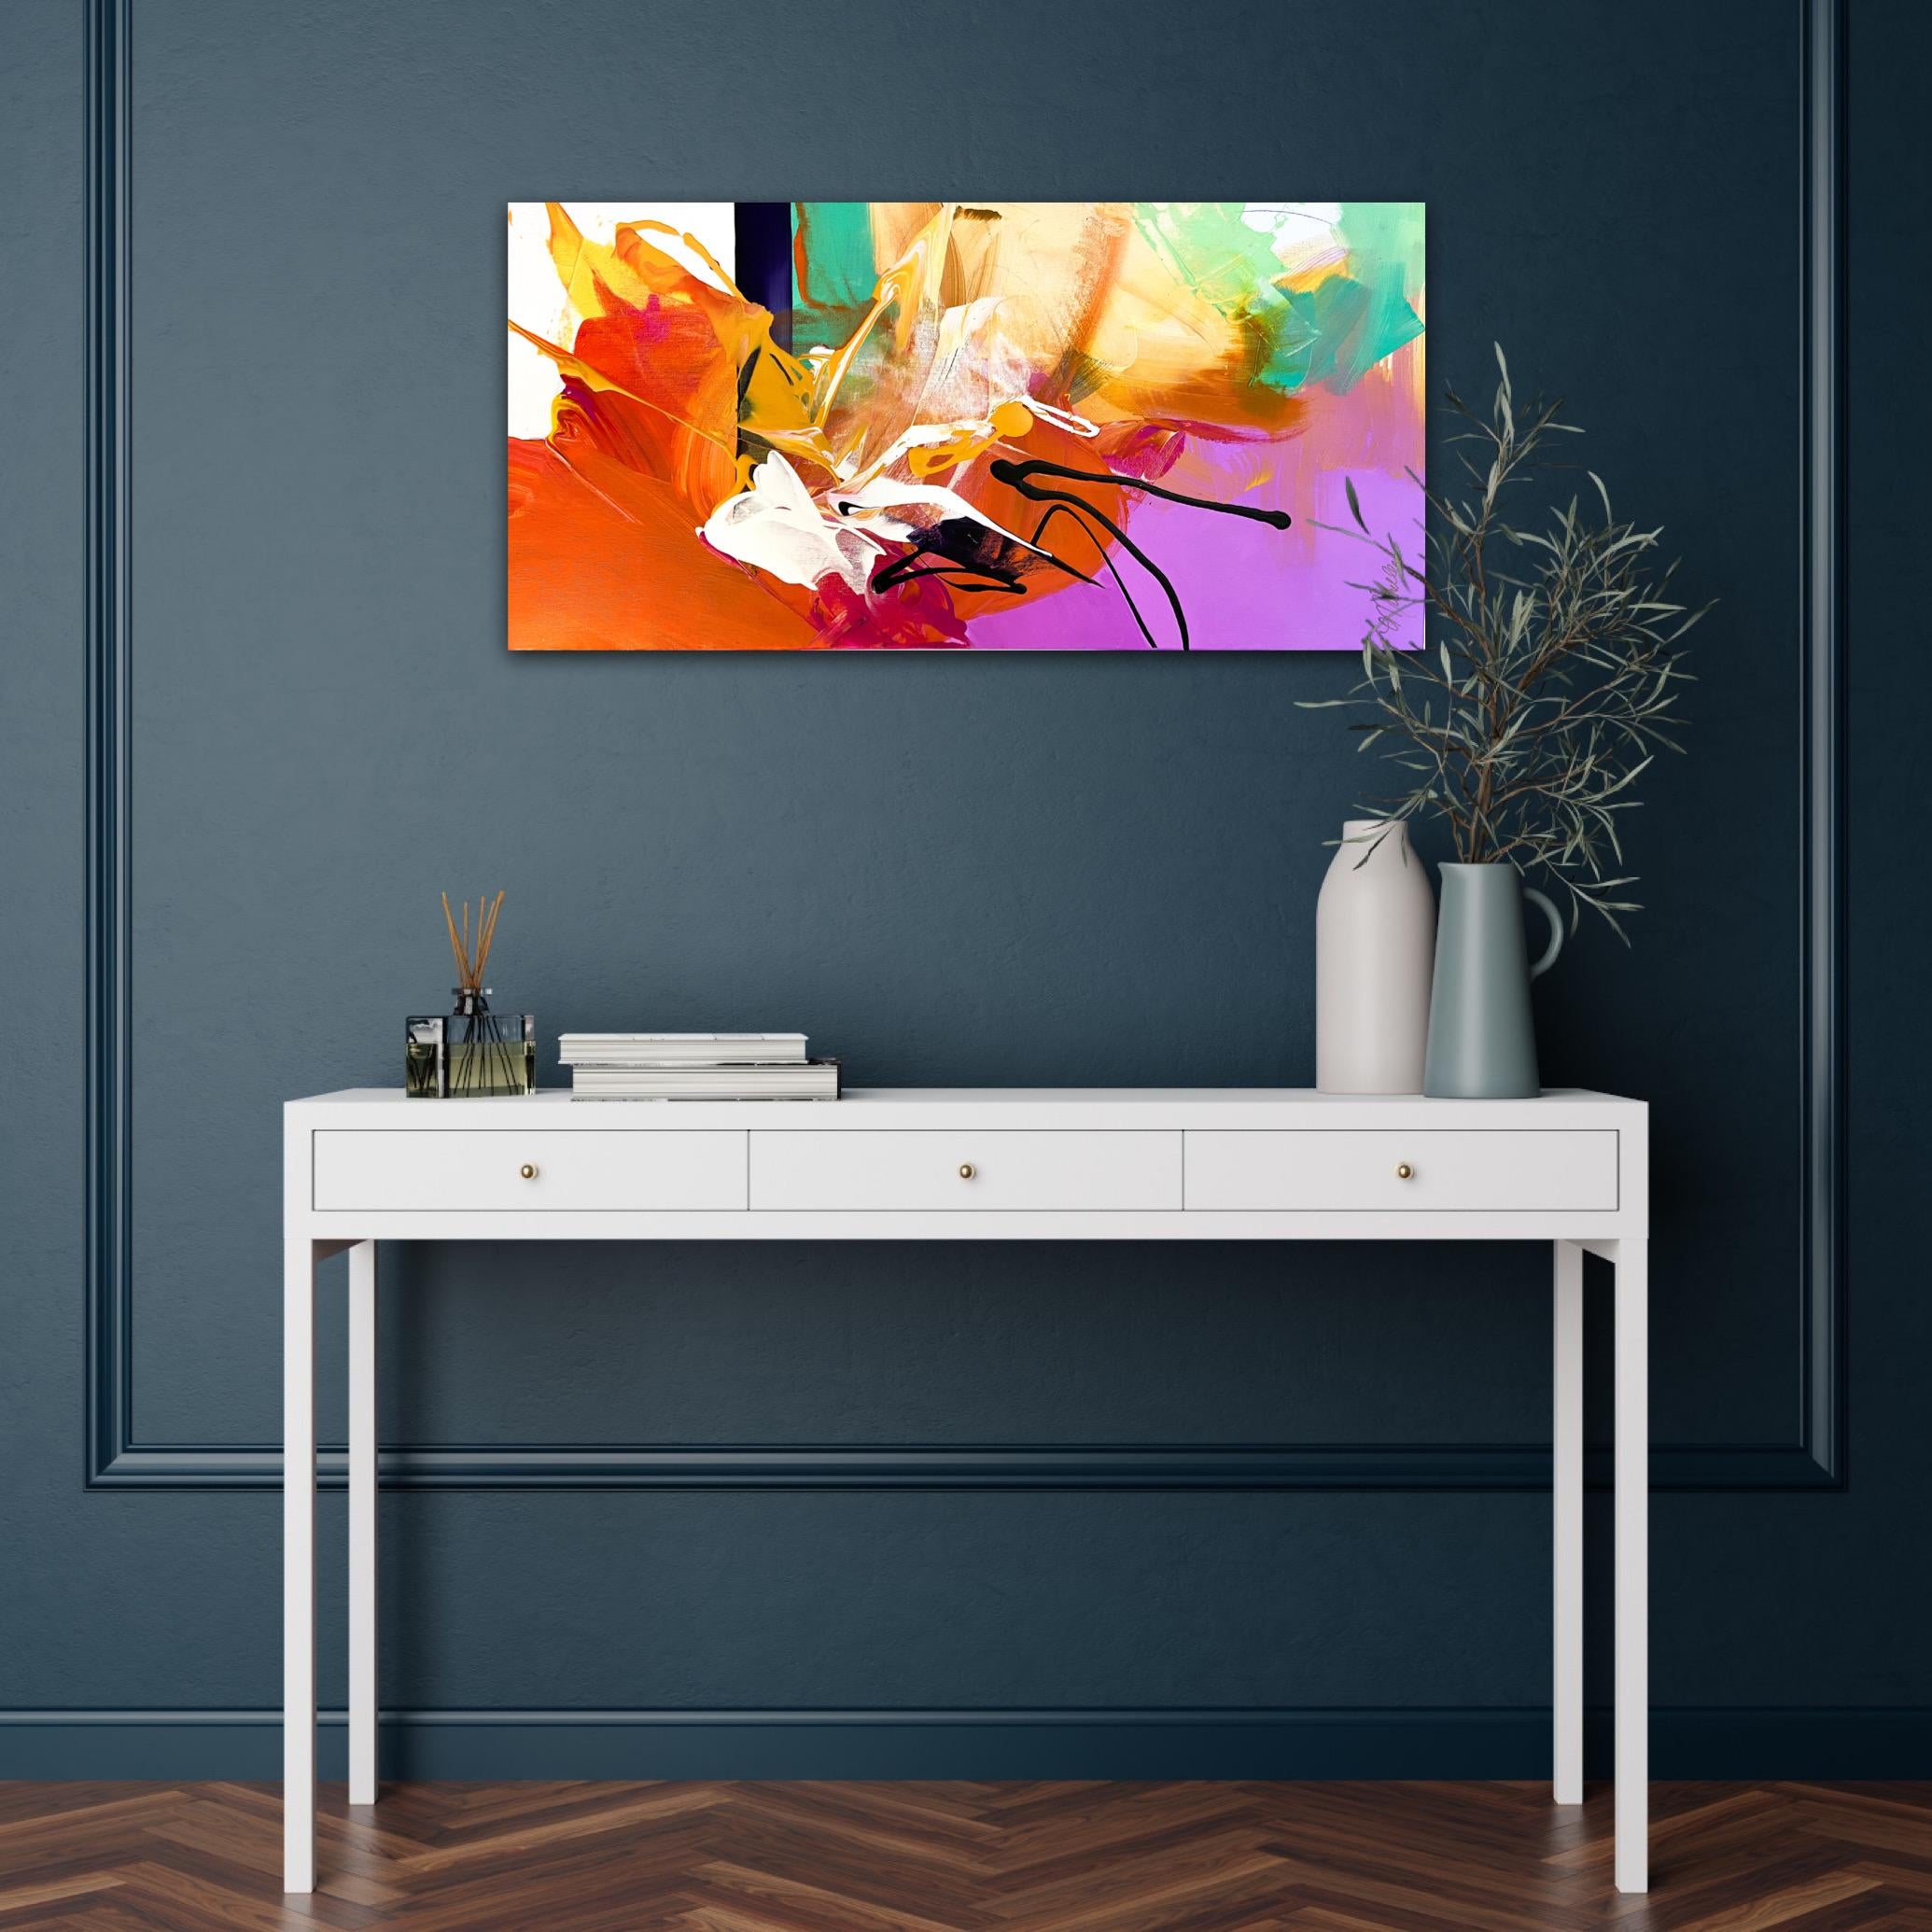 Artist Motivation:

Harmonious and bold, this piece will add rhythm, color and excitement to any room!

